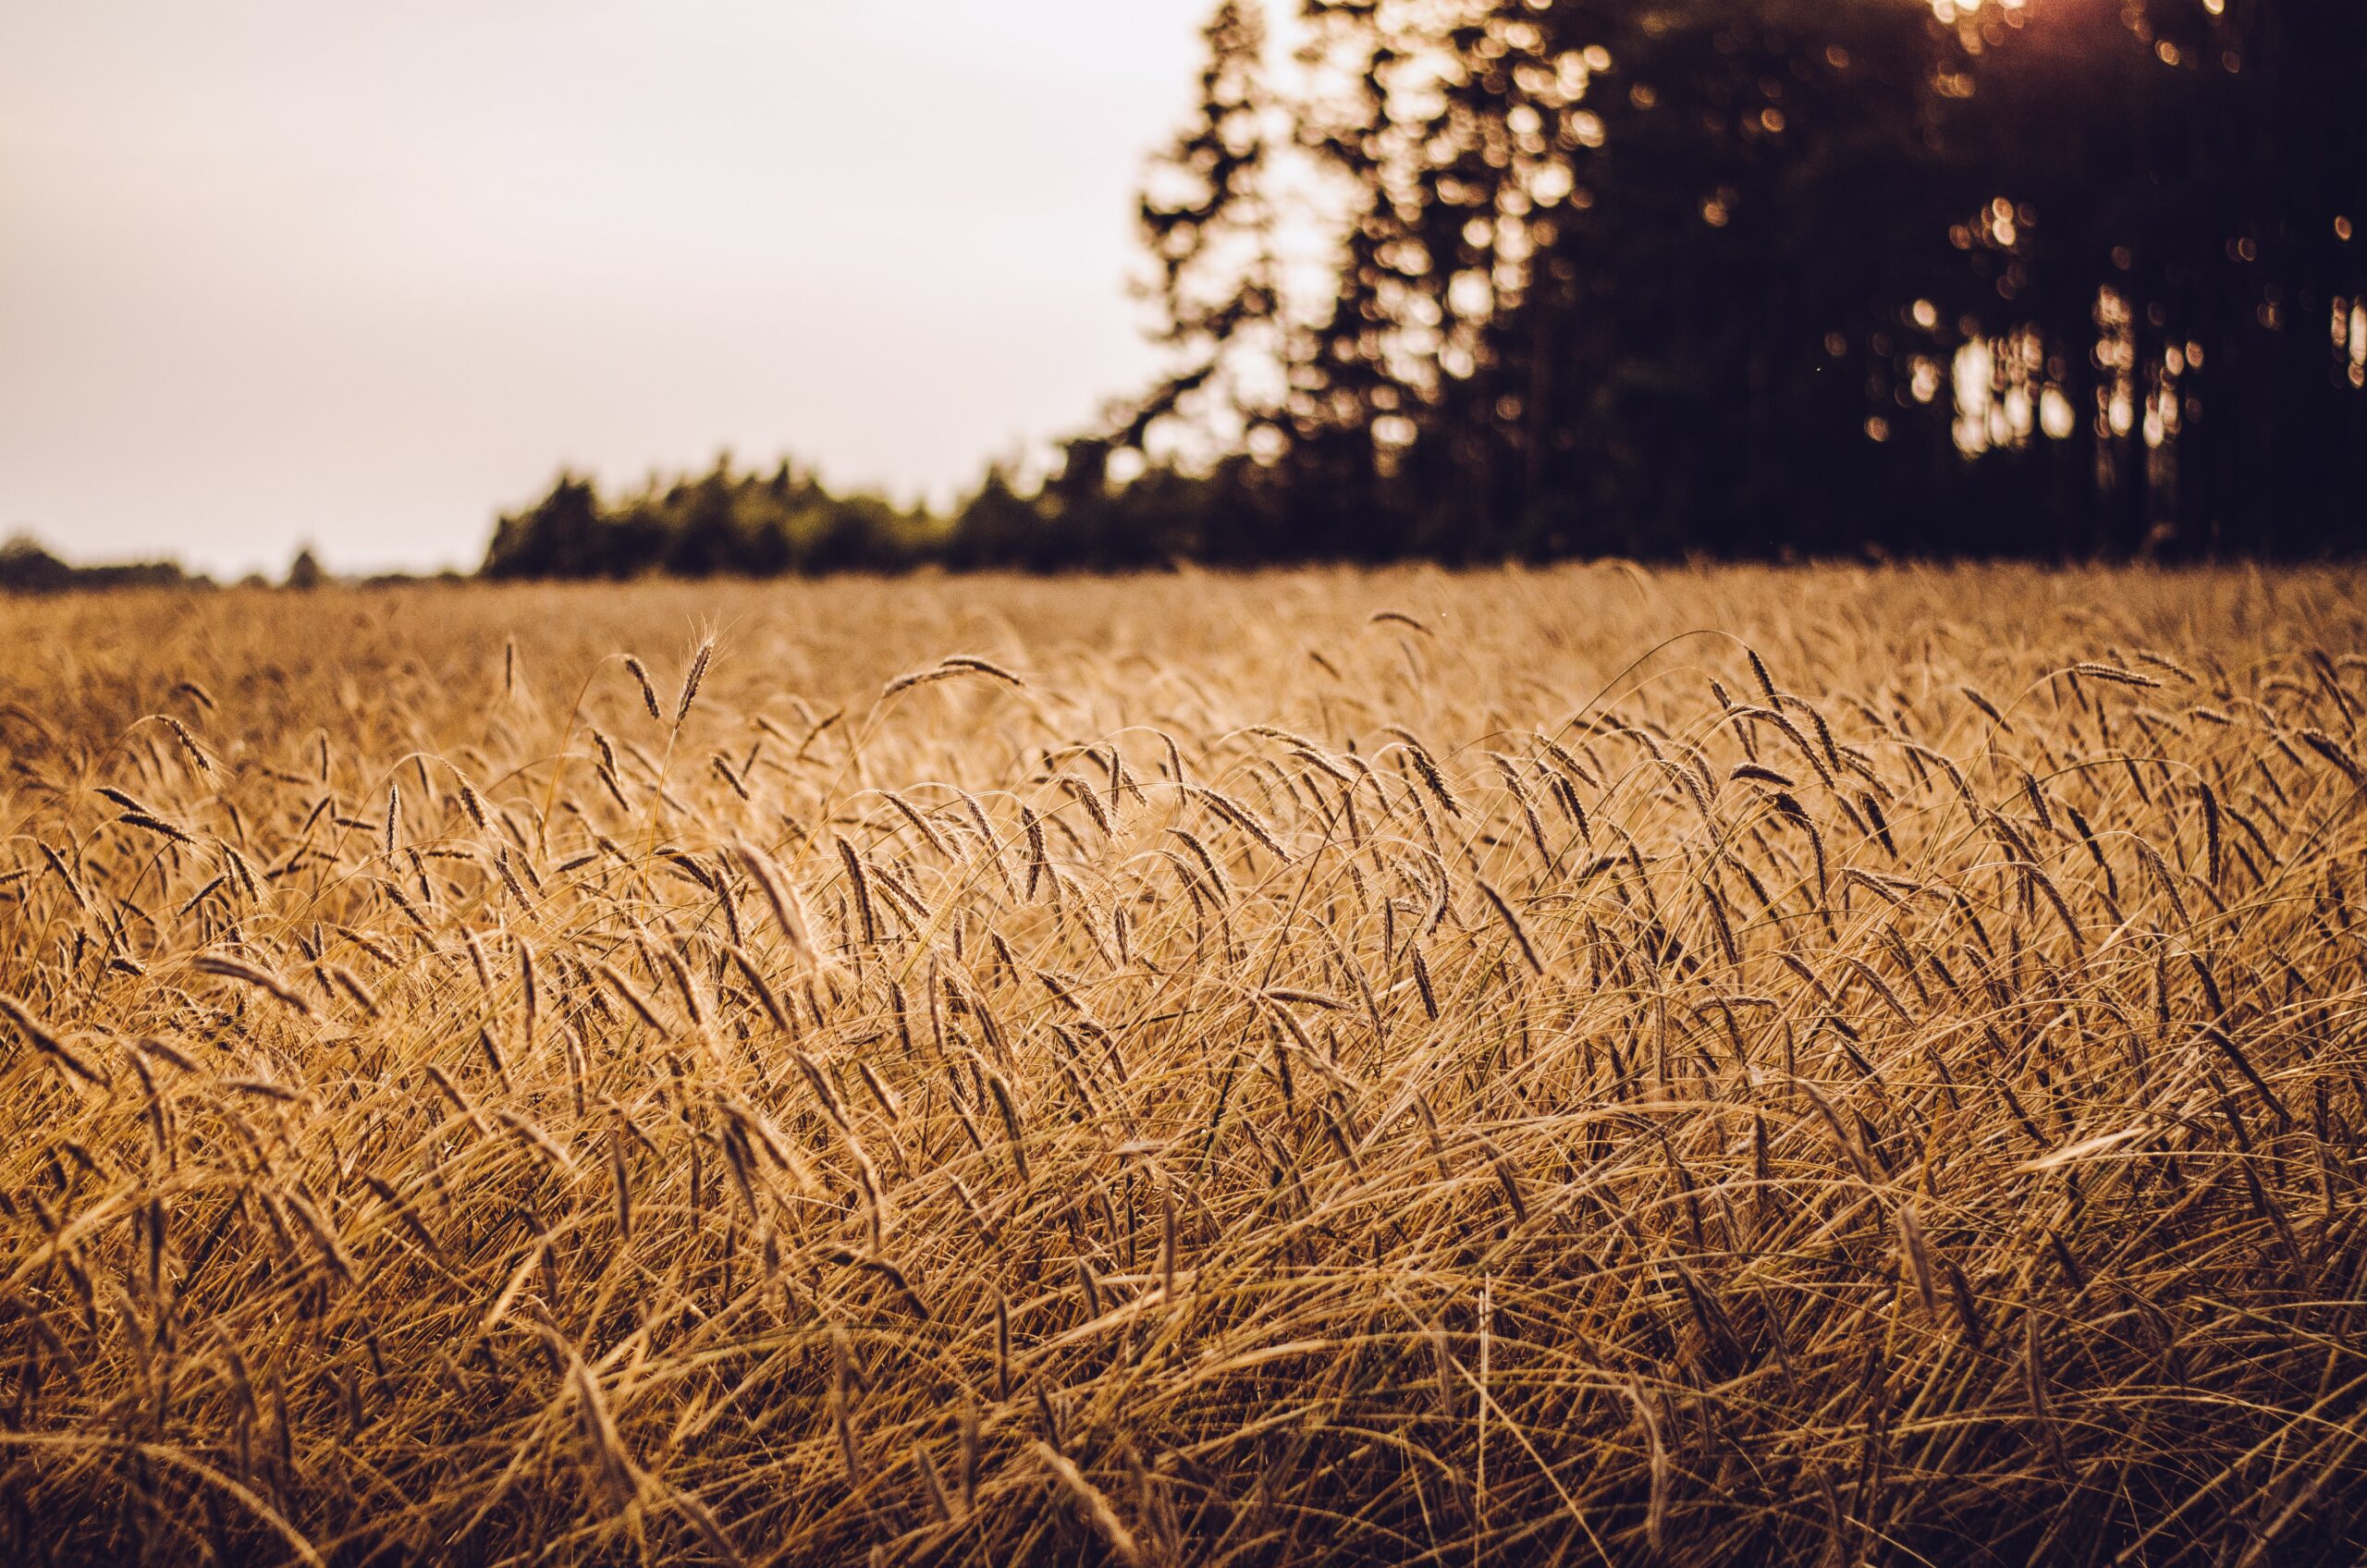 A picture at sunset of a field of wheat with some trees in the background